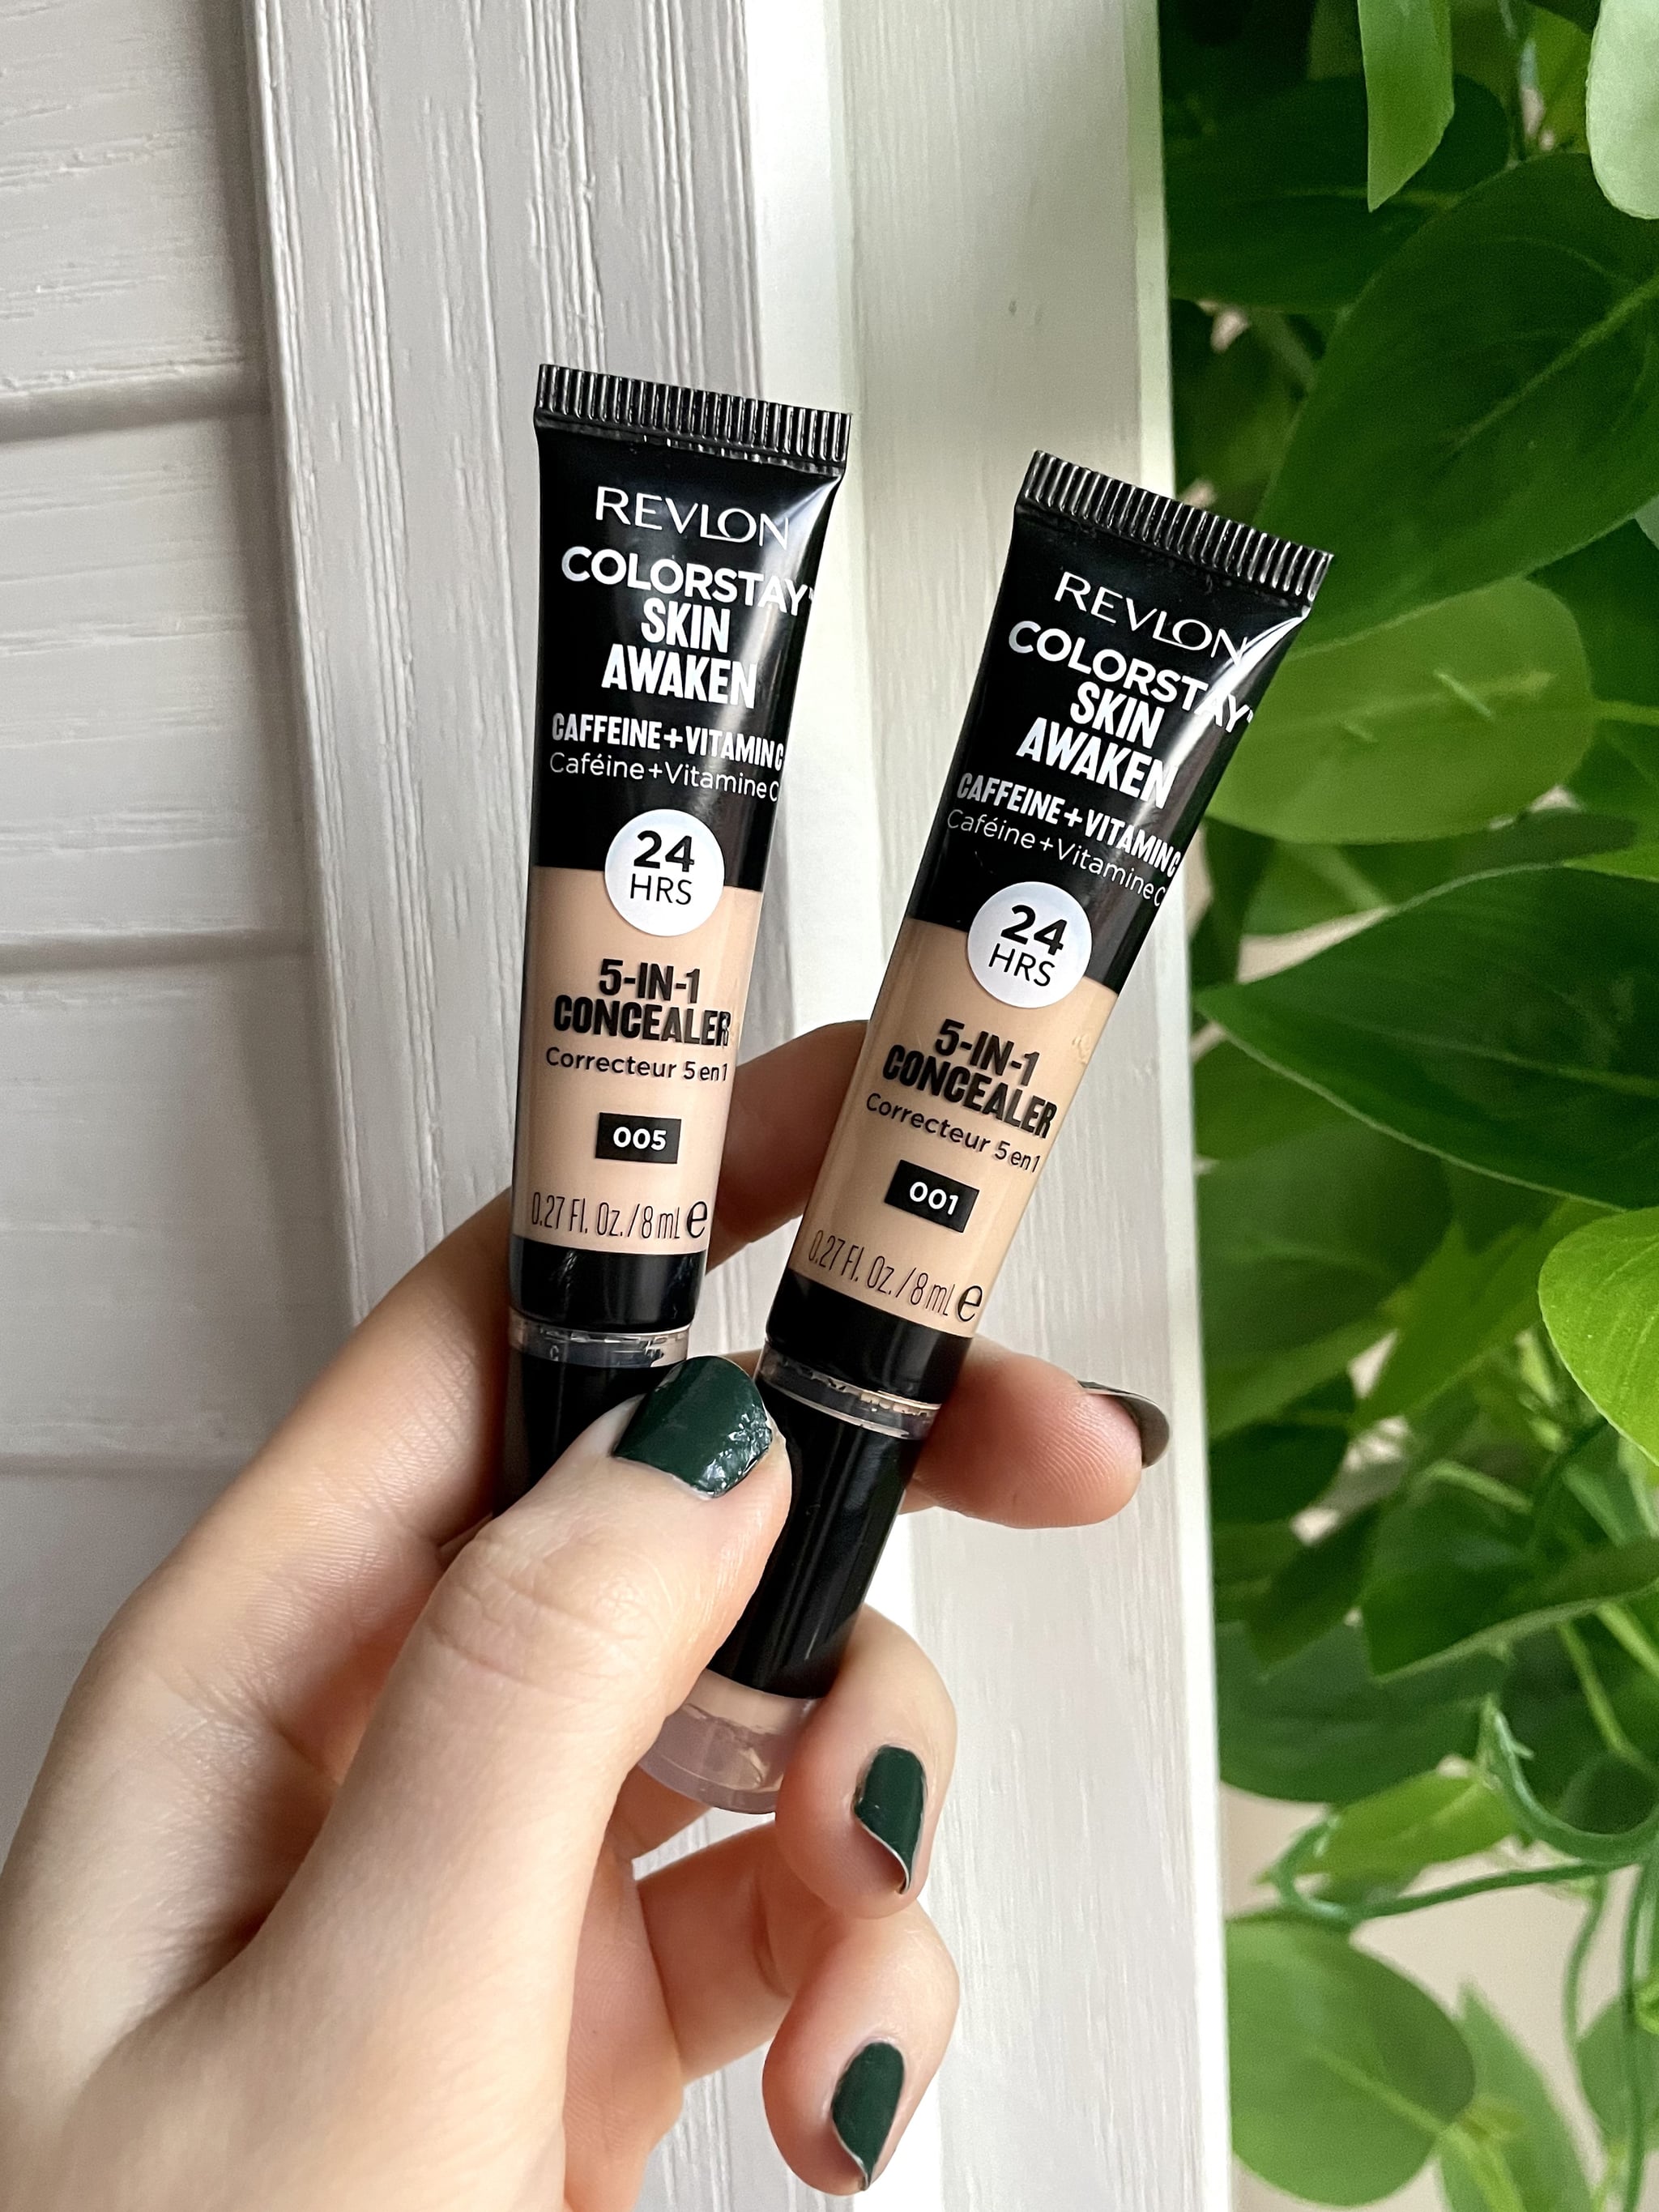 ColorStay Skin Awaken Concealer Review With Photos | POPSUGAR Beauty